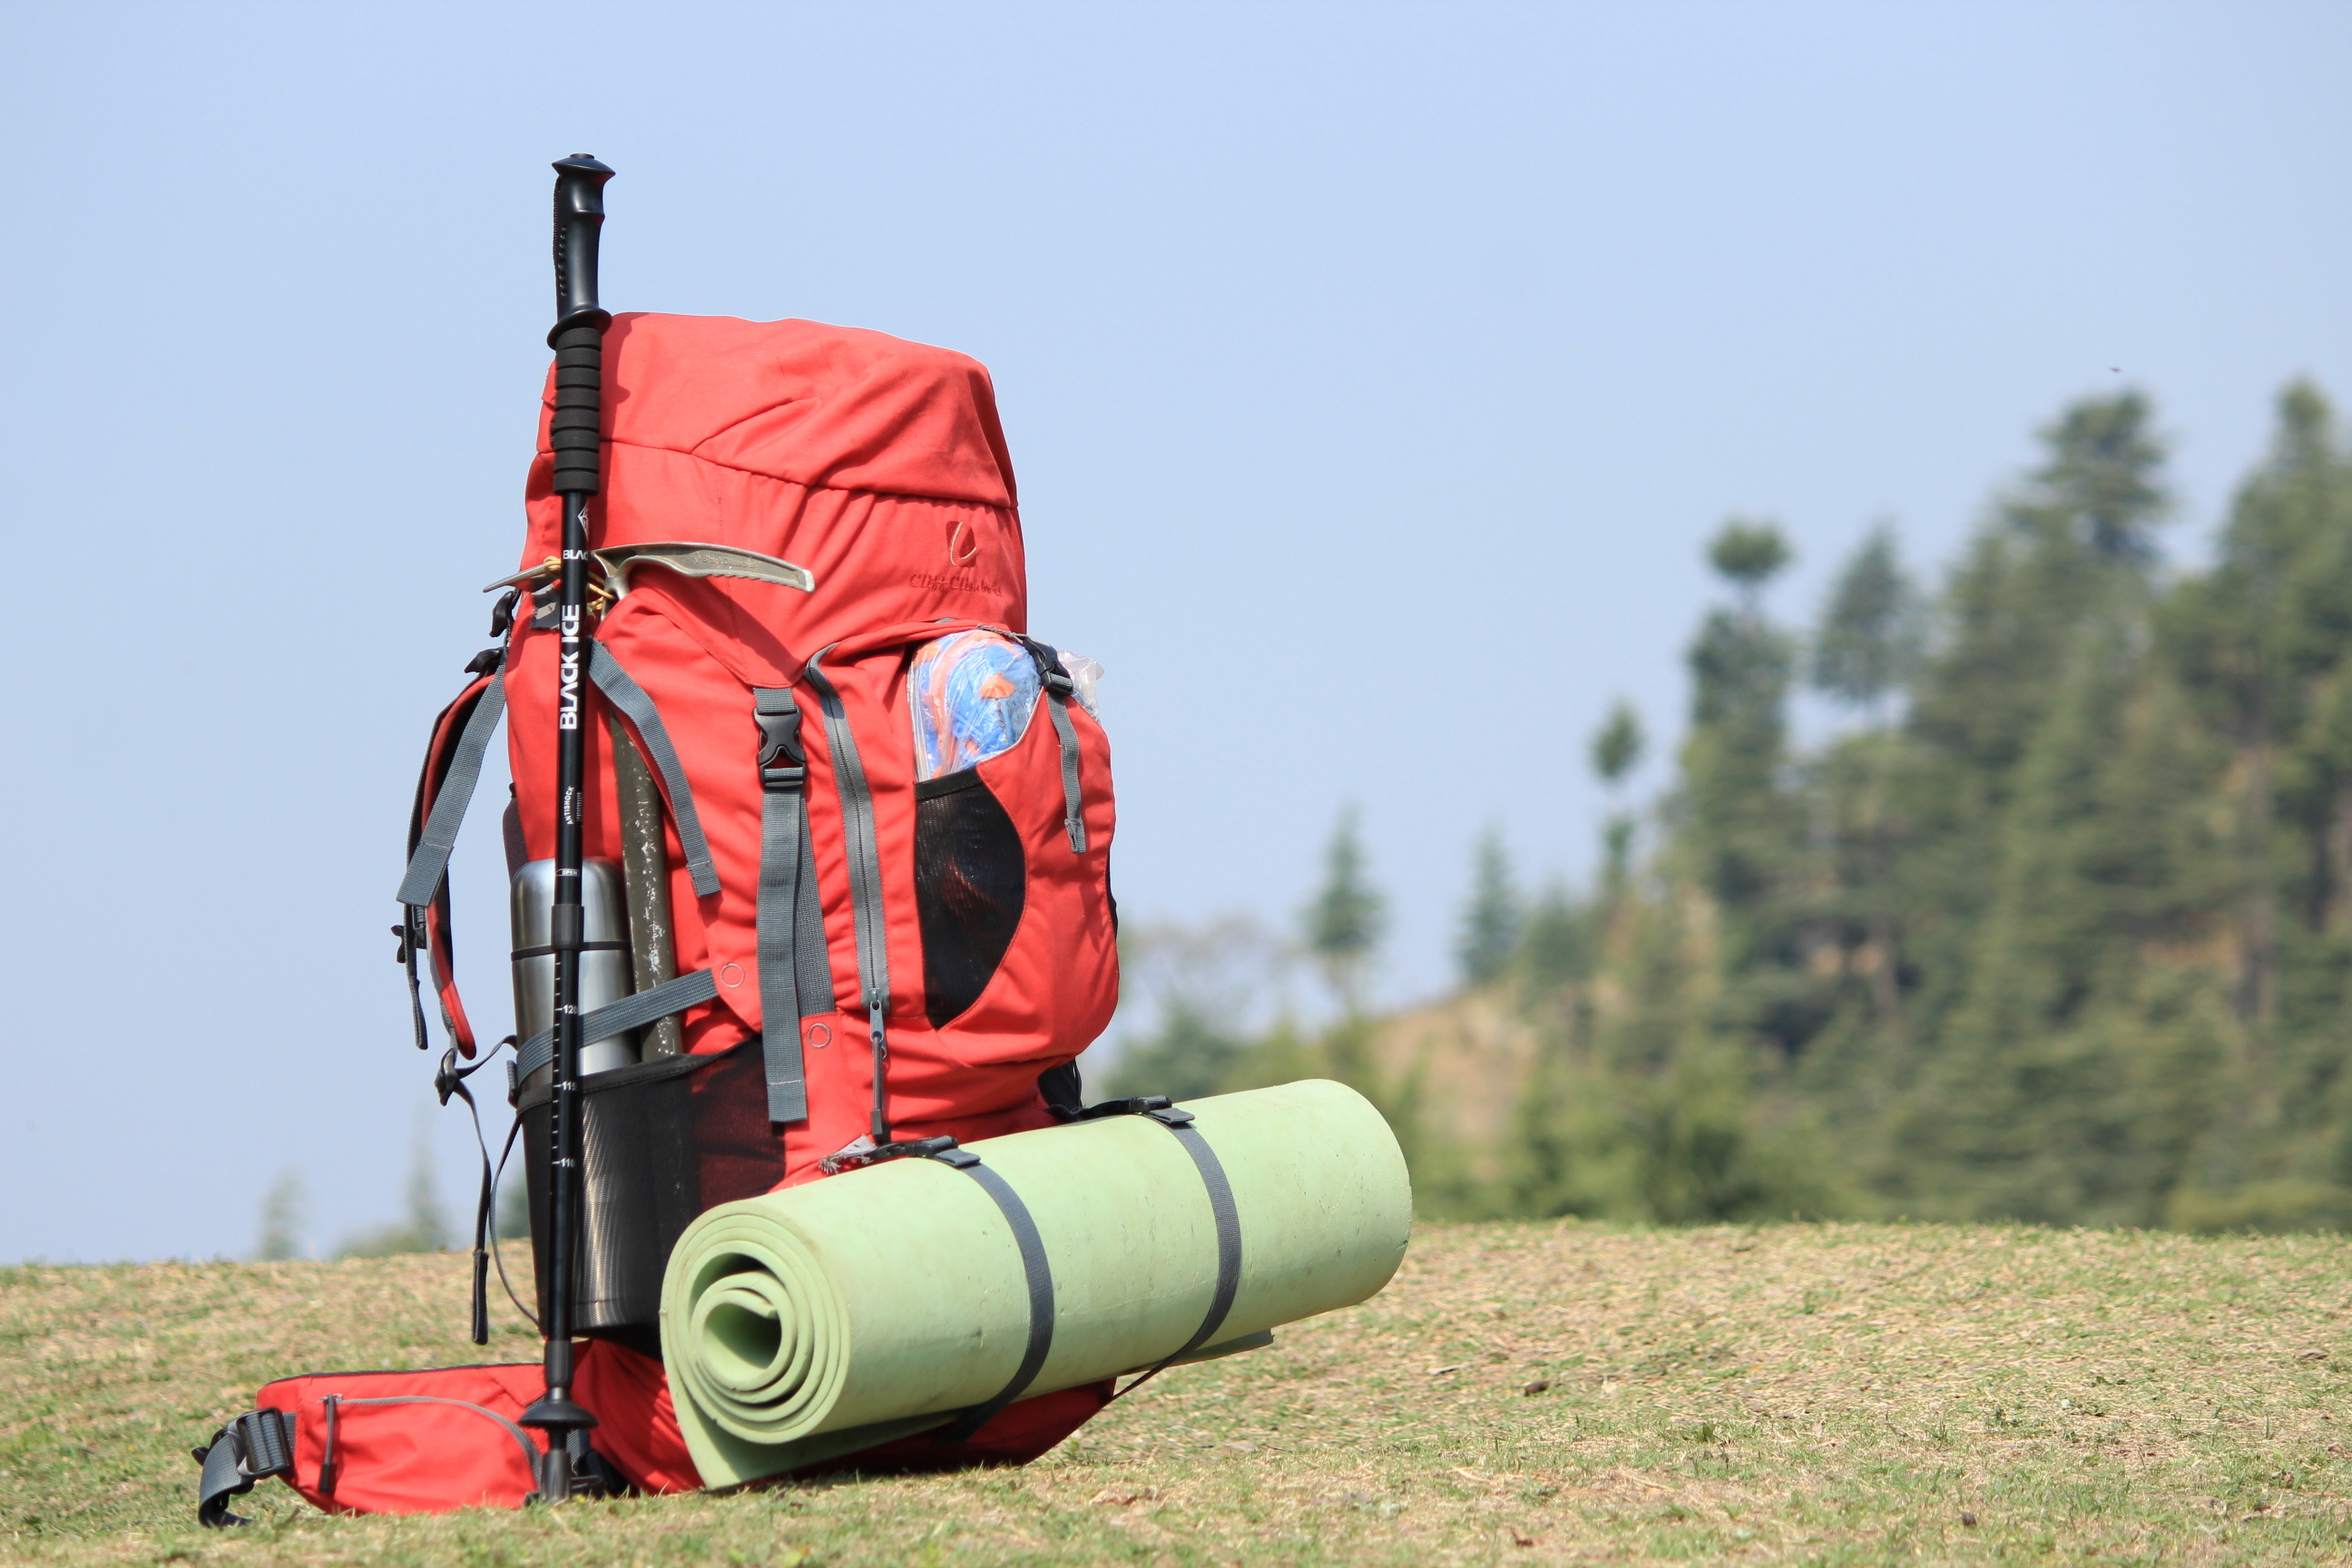 Backpacking: Hiking equipment - a backpack, survival gear, sleep system and some food/water supplies. 2600x1730 HD Background.